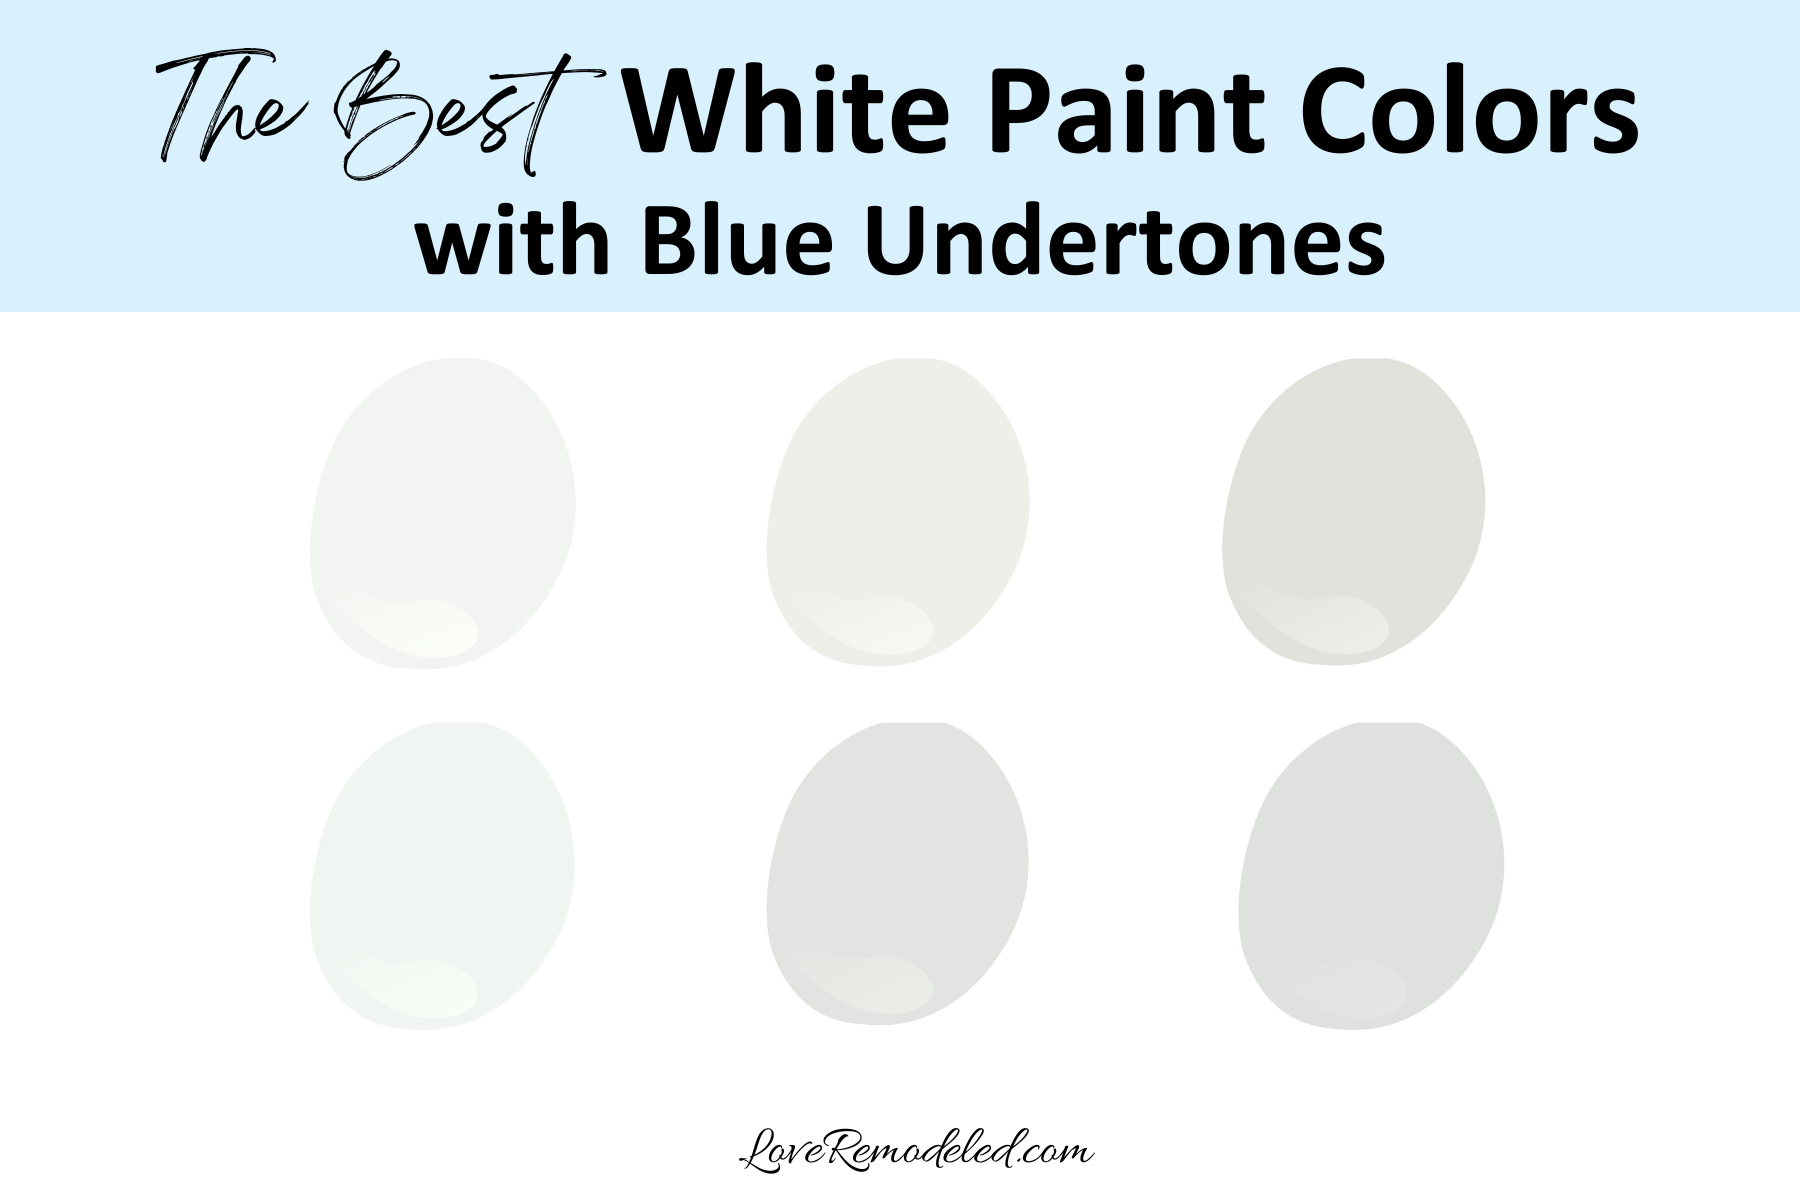 The Best White Paint with Blue Undertones - Extra White, Ice Cube, Rock Candy, Distant Gray, Snow White, and Paper White